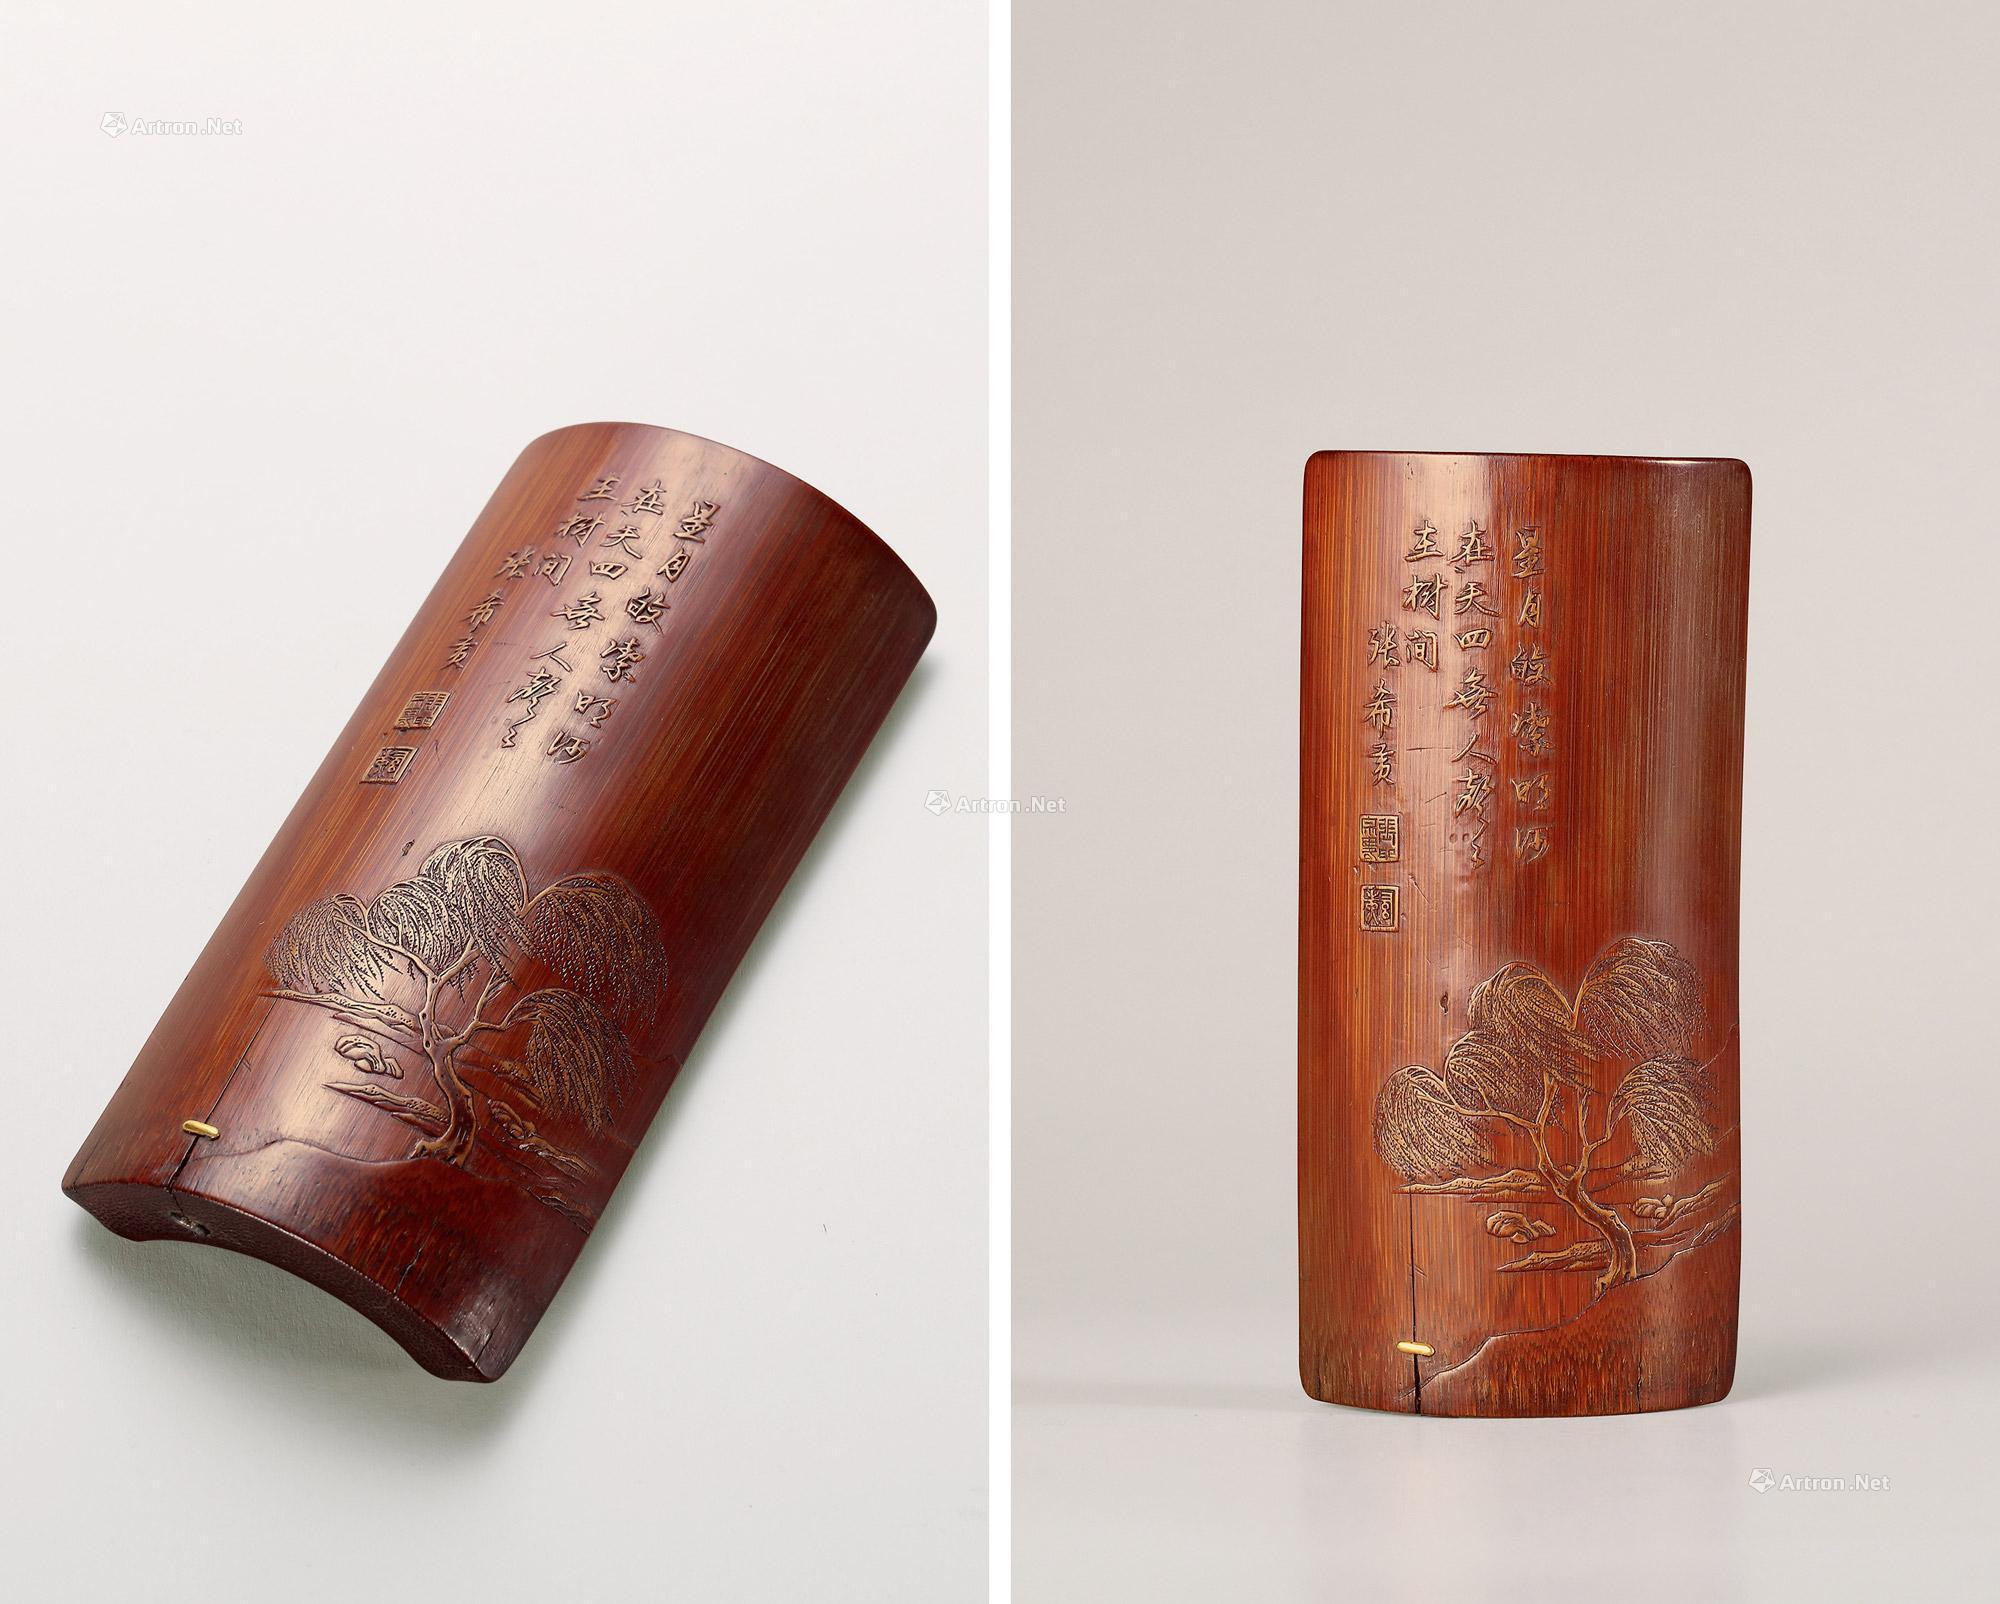 A BAMBOO TEA CEREMONY OBJECT BY ZHANG XIHUANG